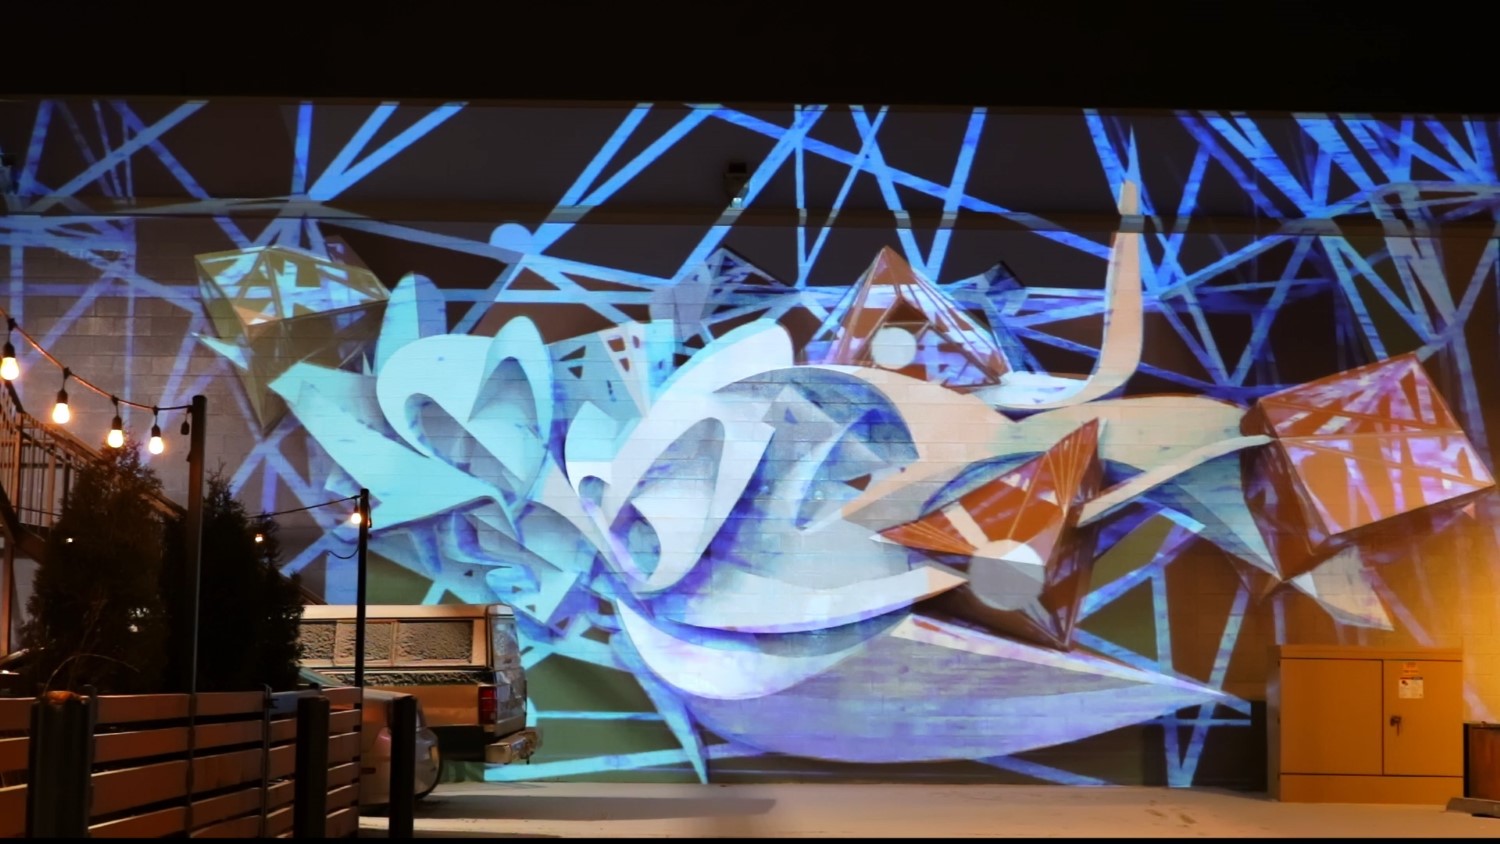 Alt Ethos Projection Mapping